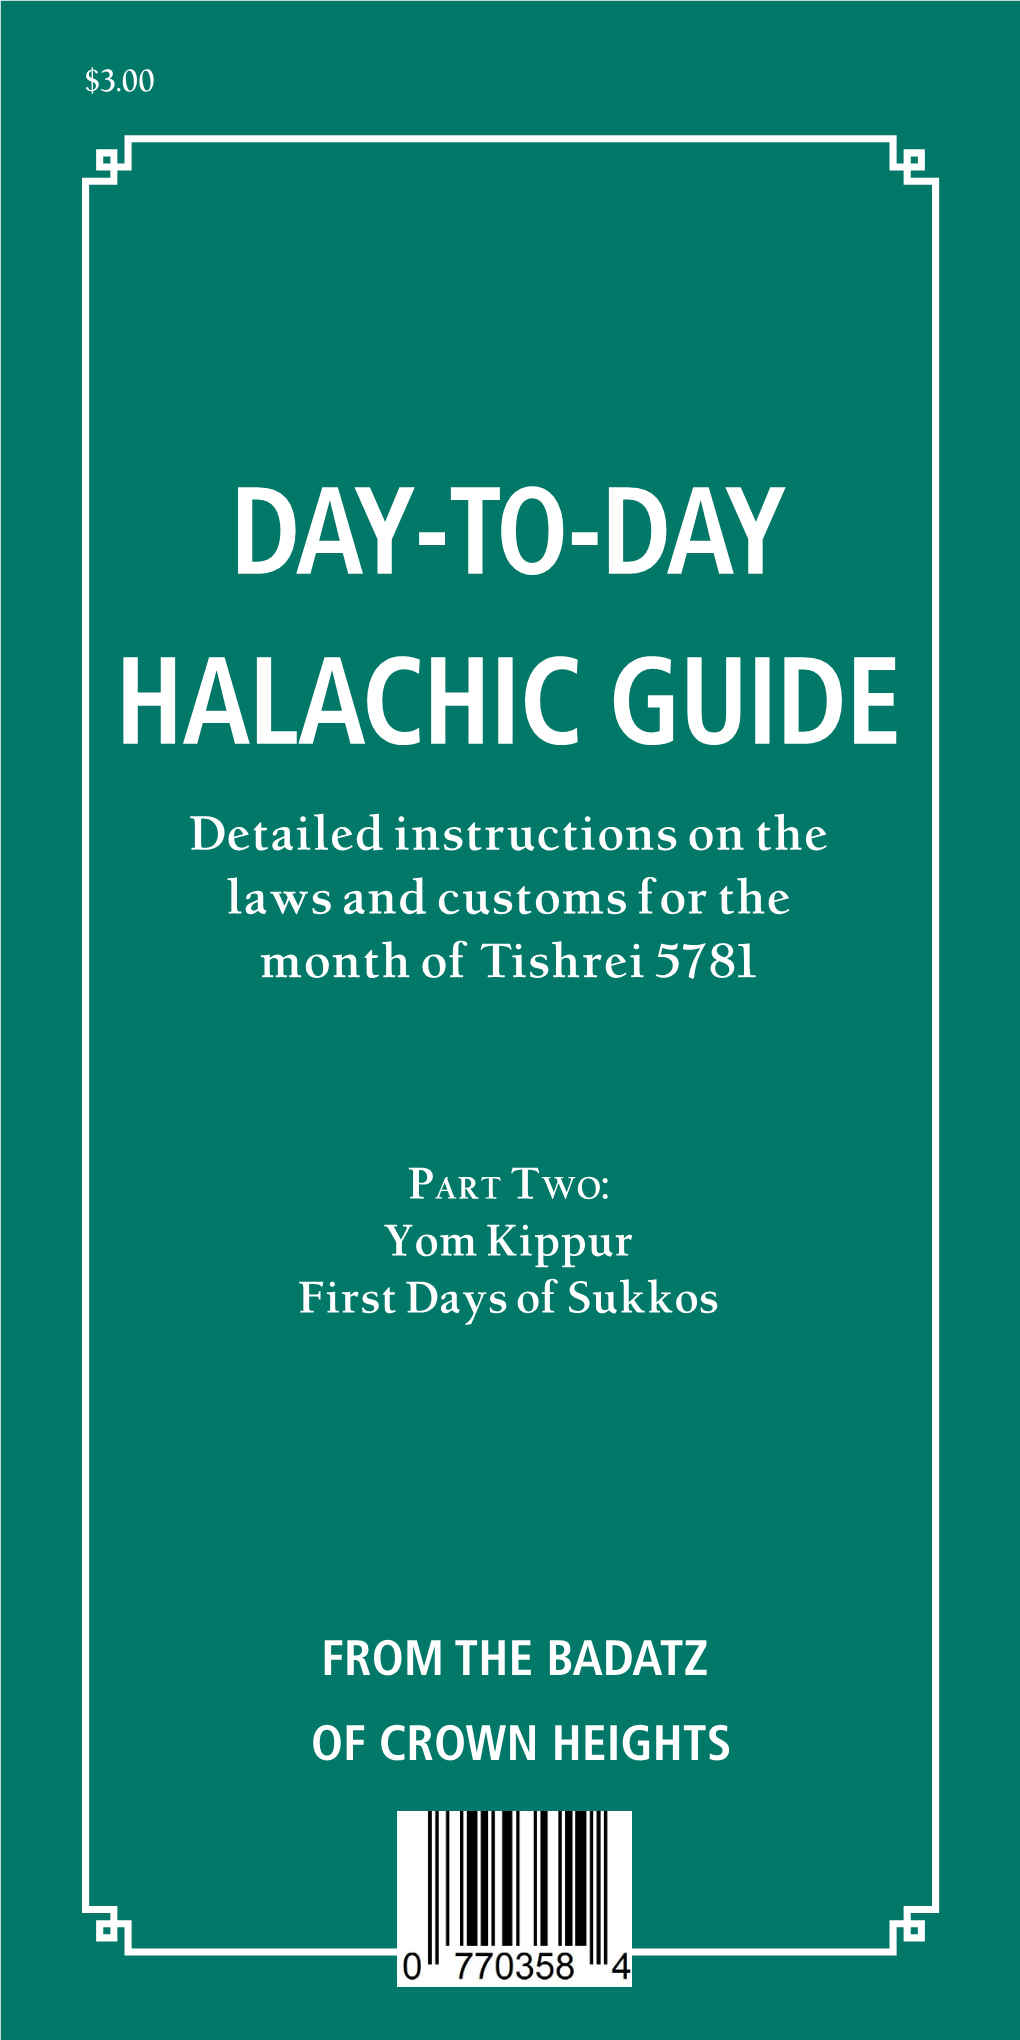 DAY-TO-DAY HALACHIC GUIDE Detailed Instructions on the Laws and Customs for the Month of Tishrei 5781